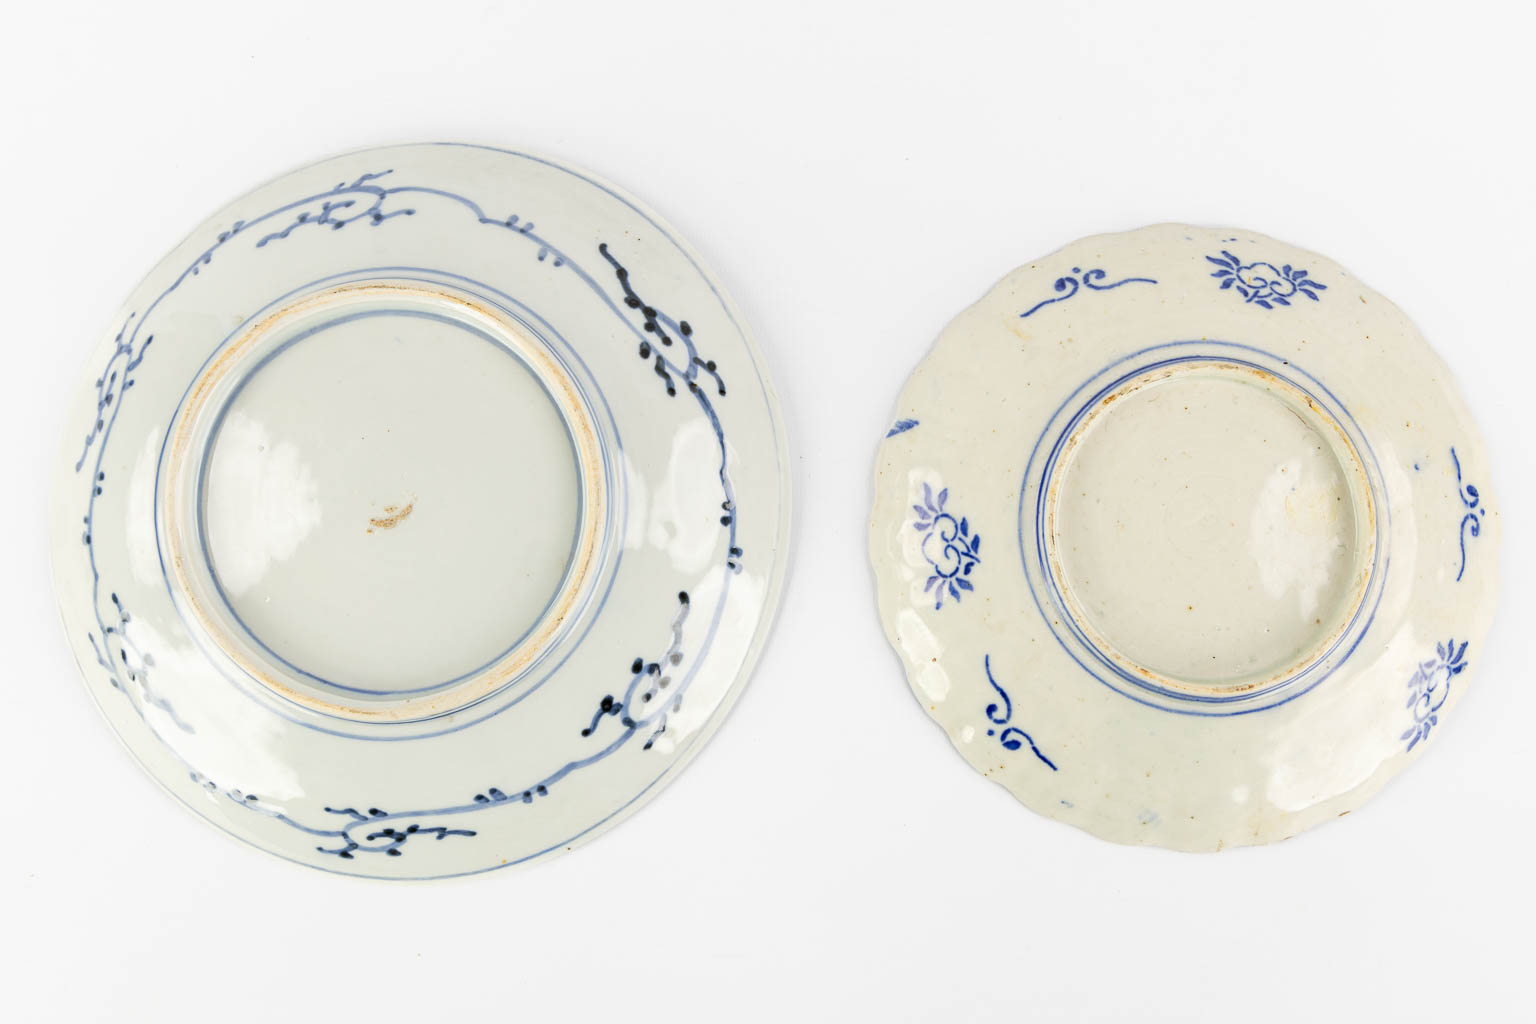 Four plates and two vases, Japan, Imari. 19th and 20th C. (H:34,5 x D:17 cm)